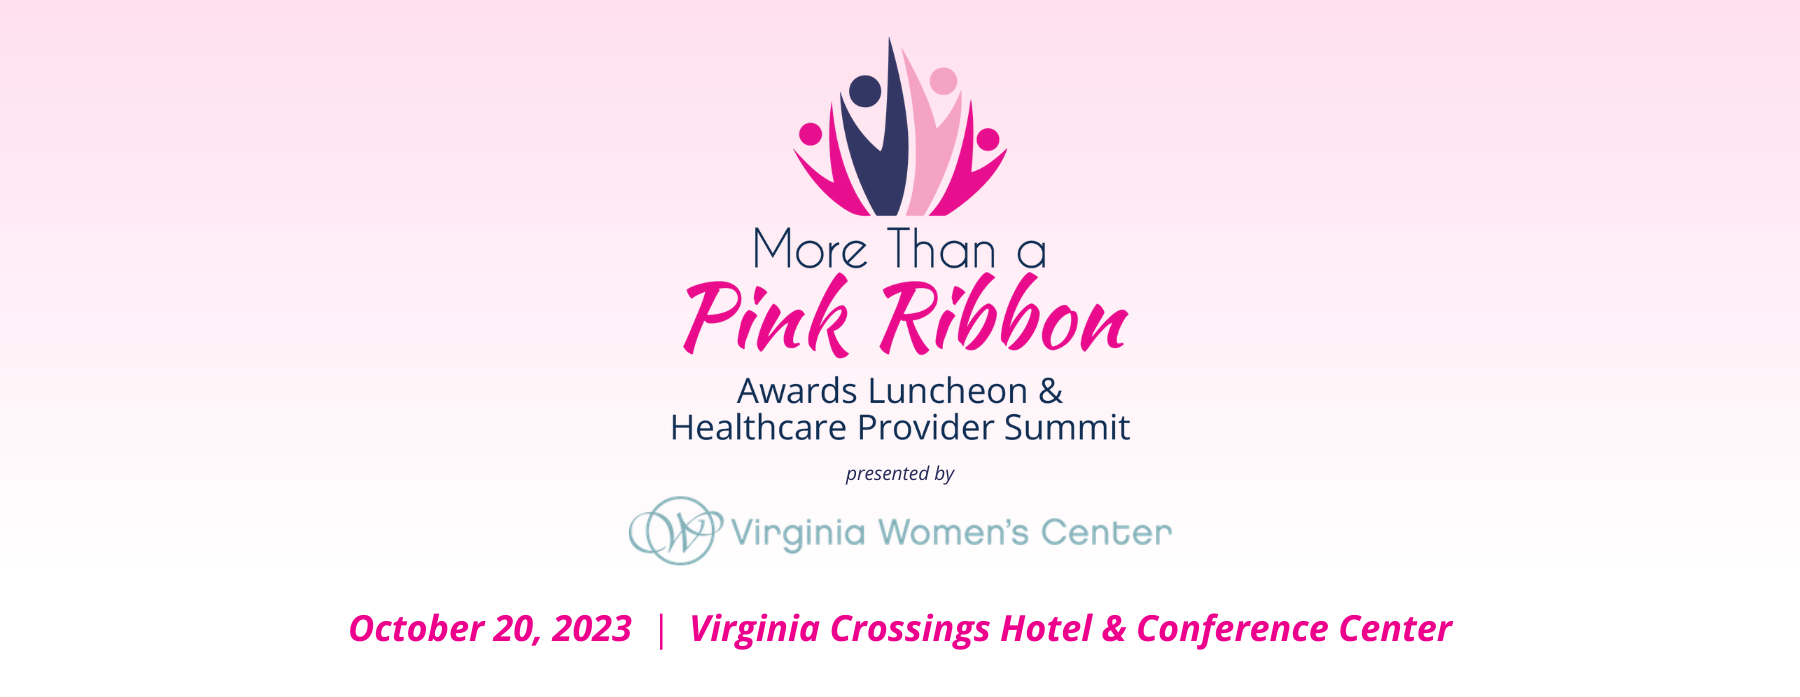 2023 More Than a Pink Ribbon Awards Luncheon and Healthcare Provider Summit